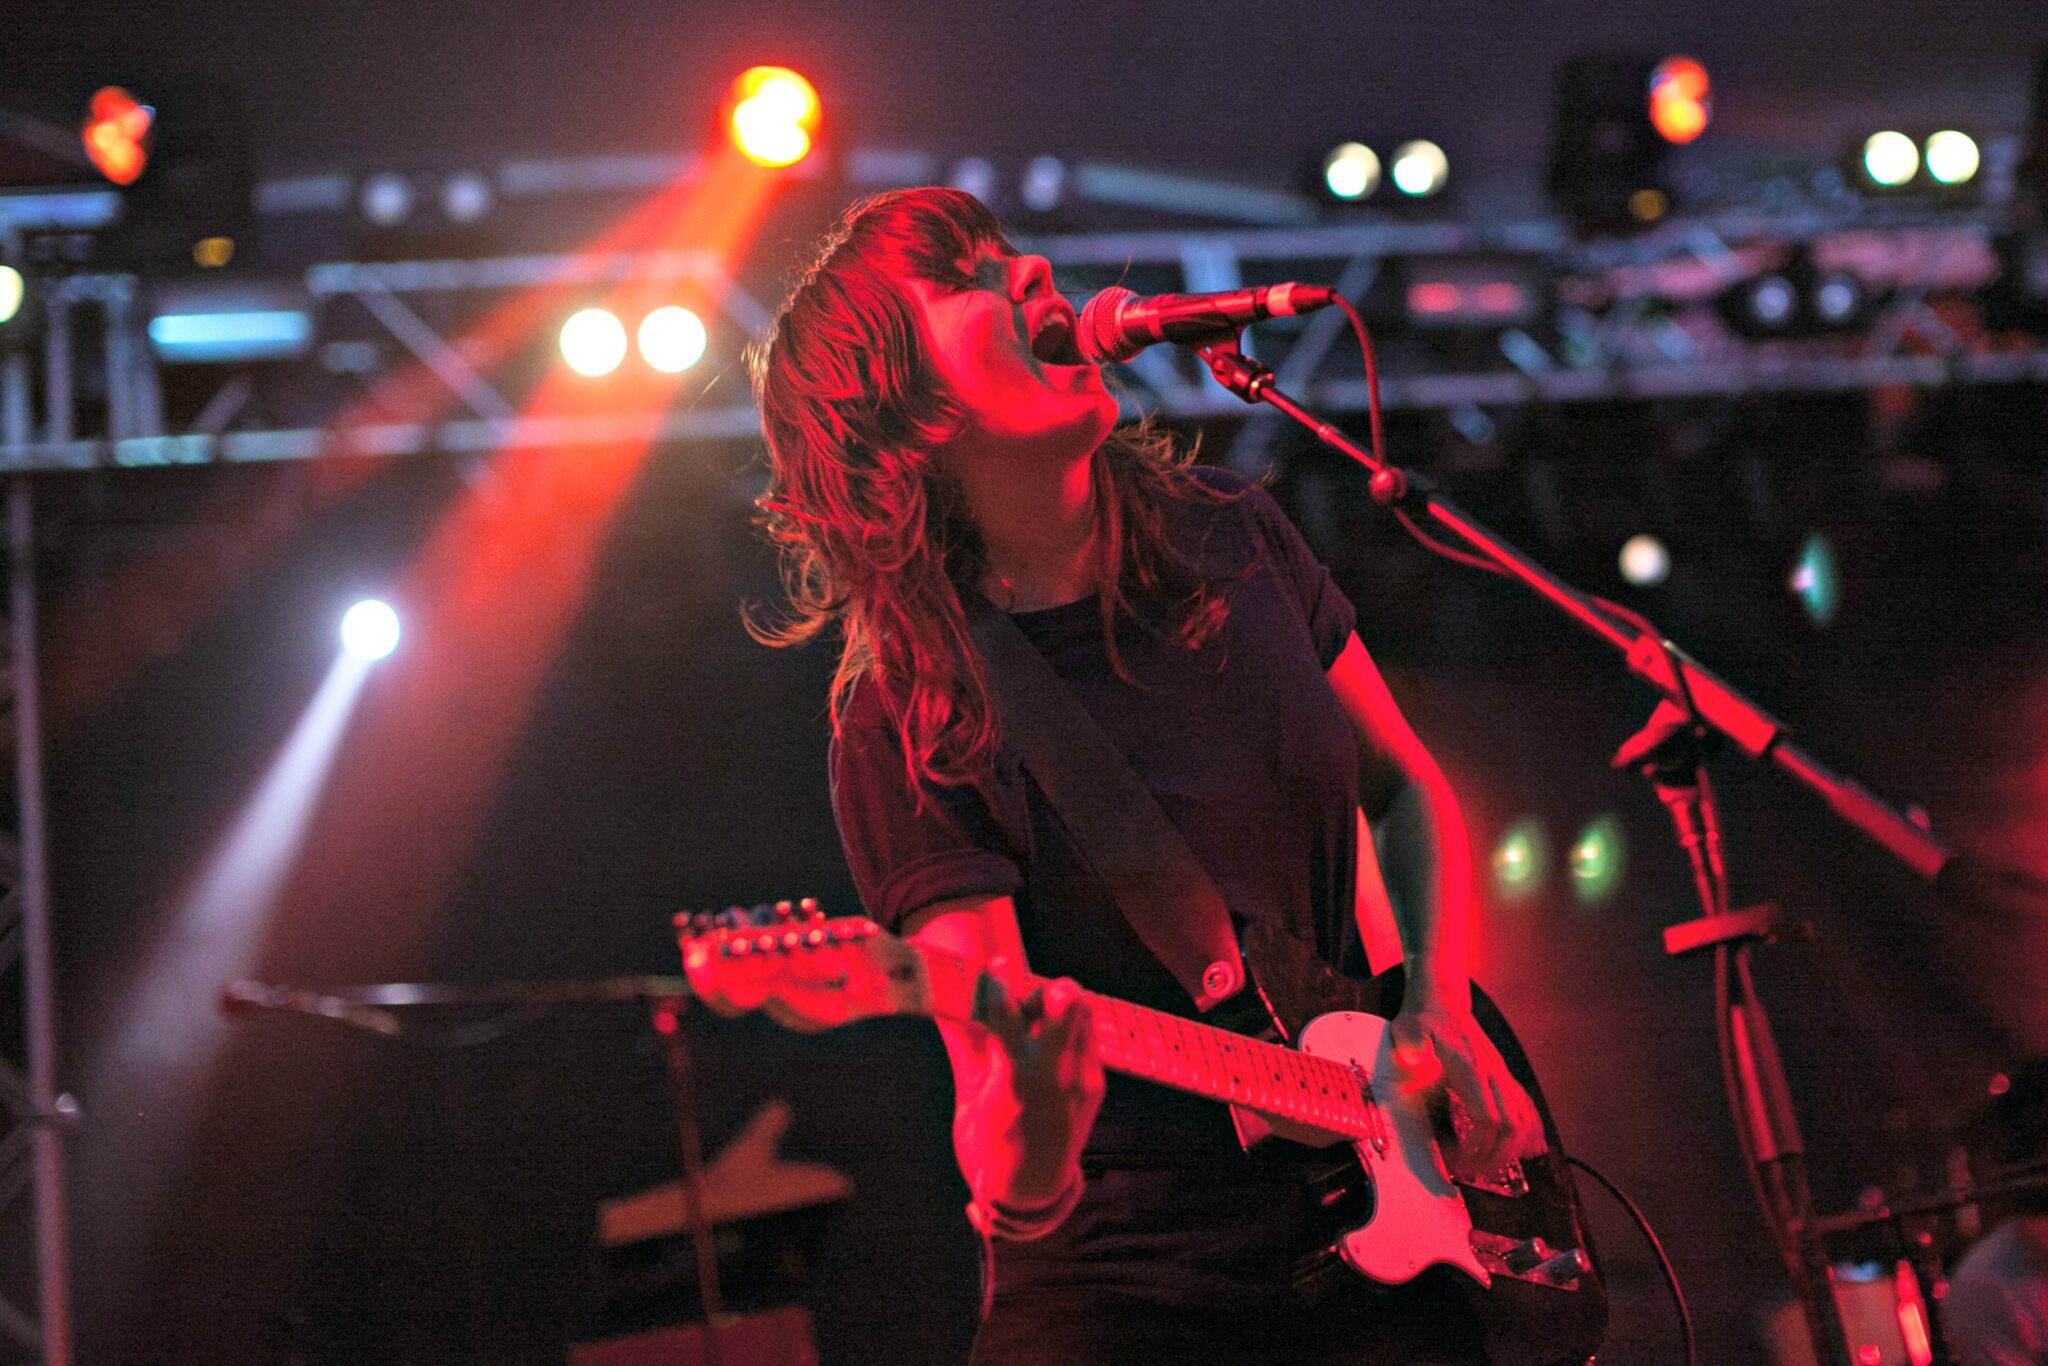 Courtney Barnett from Melbourne, Australia, performs during the NPR Music SXSW Showcase at Stubb's in Austin on Wednesday, March 18, 2015. Lukas Keapproth/AMERICAN-STATESMAN